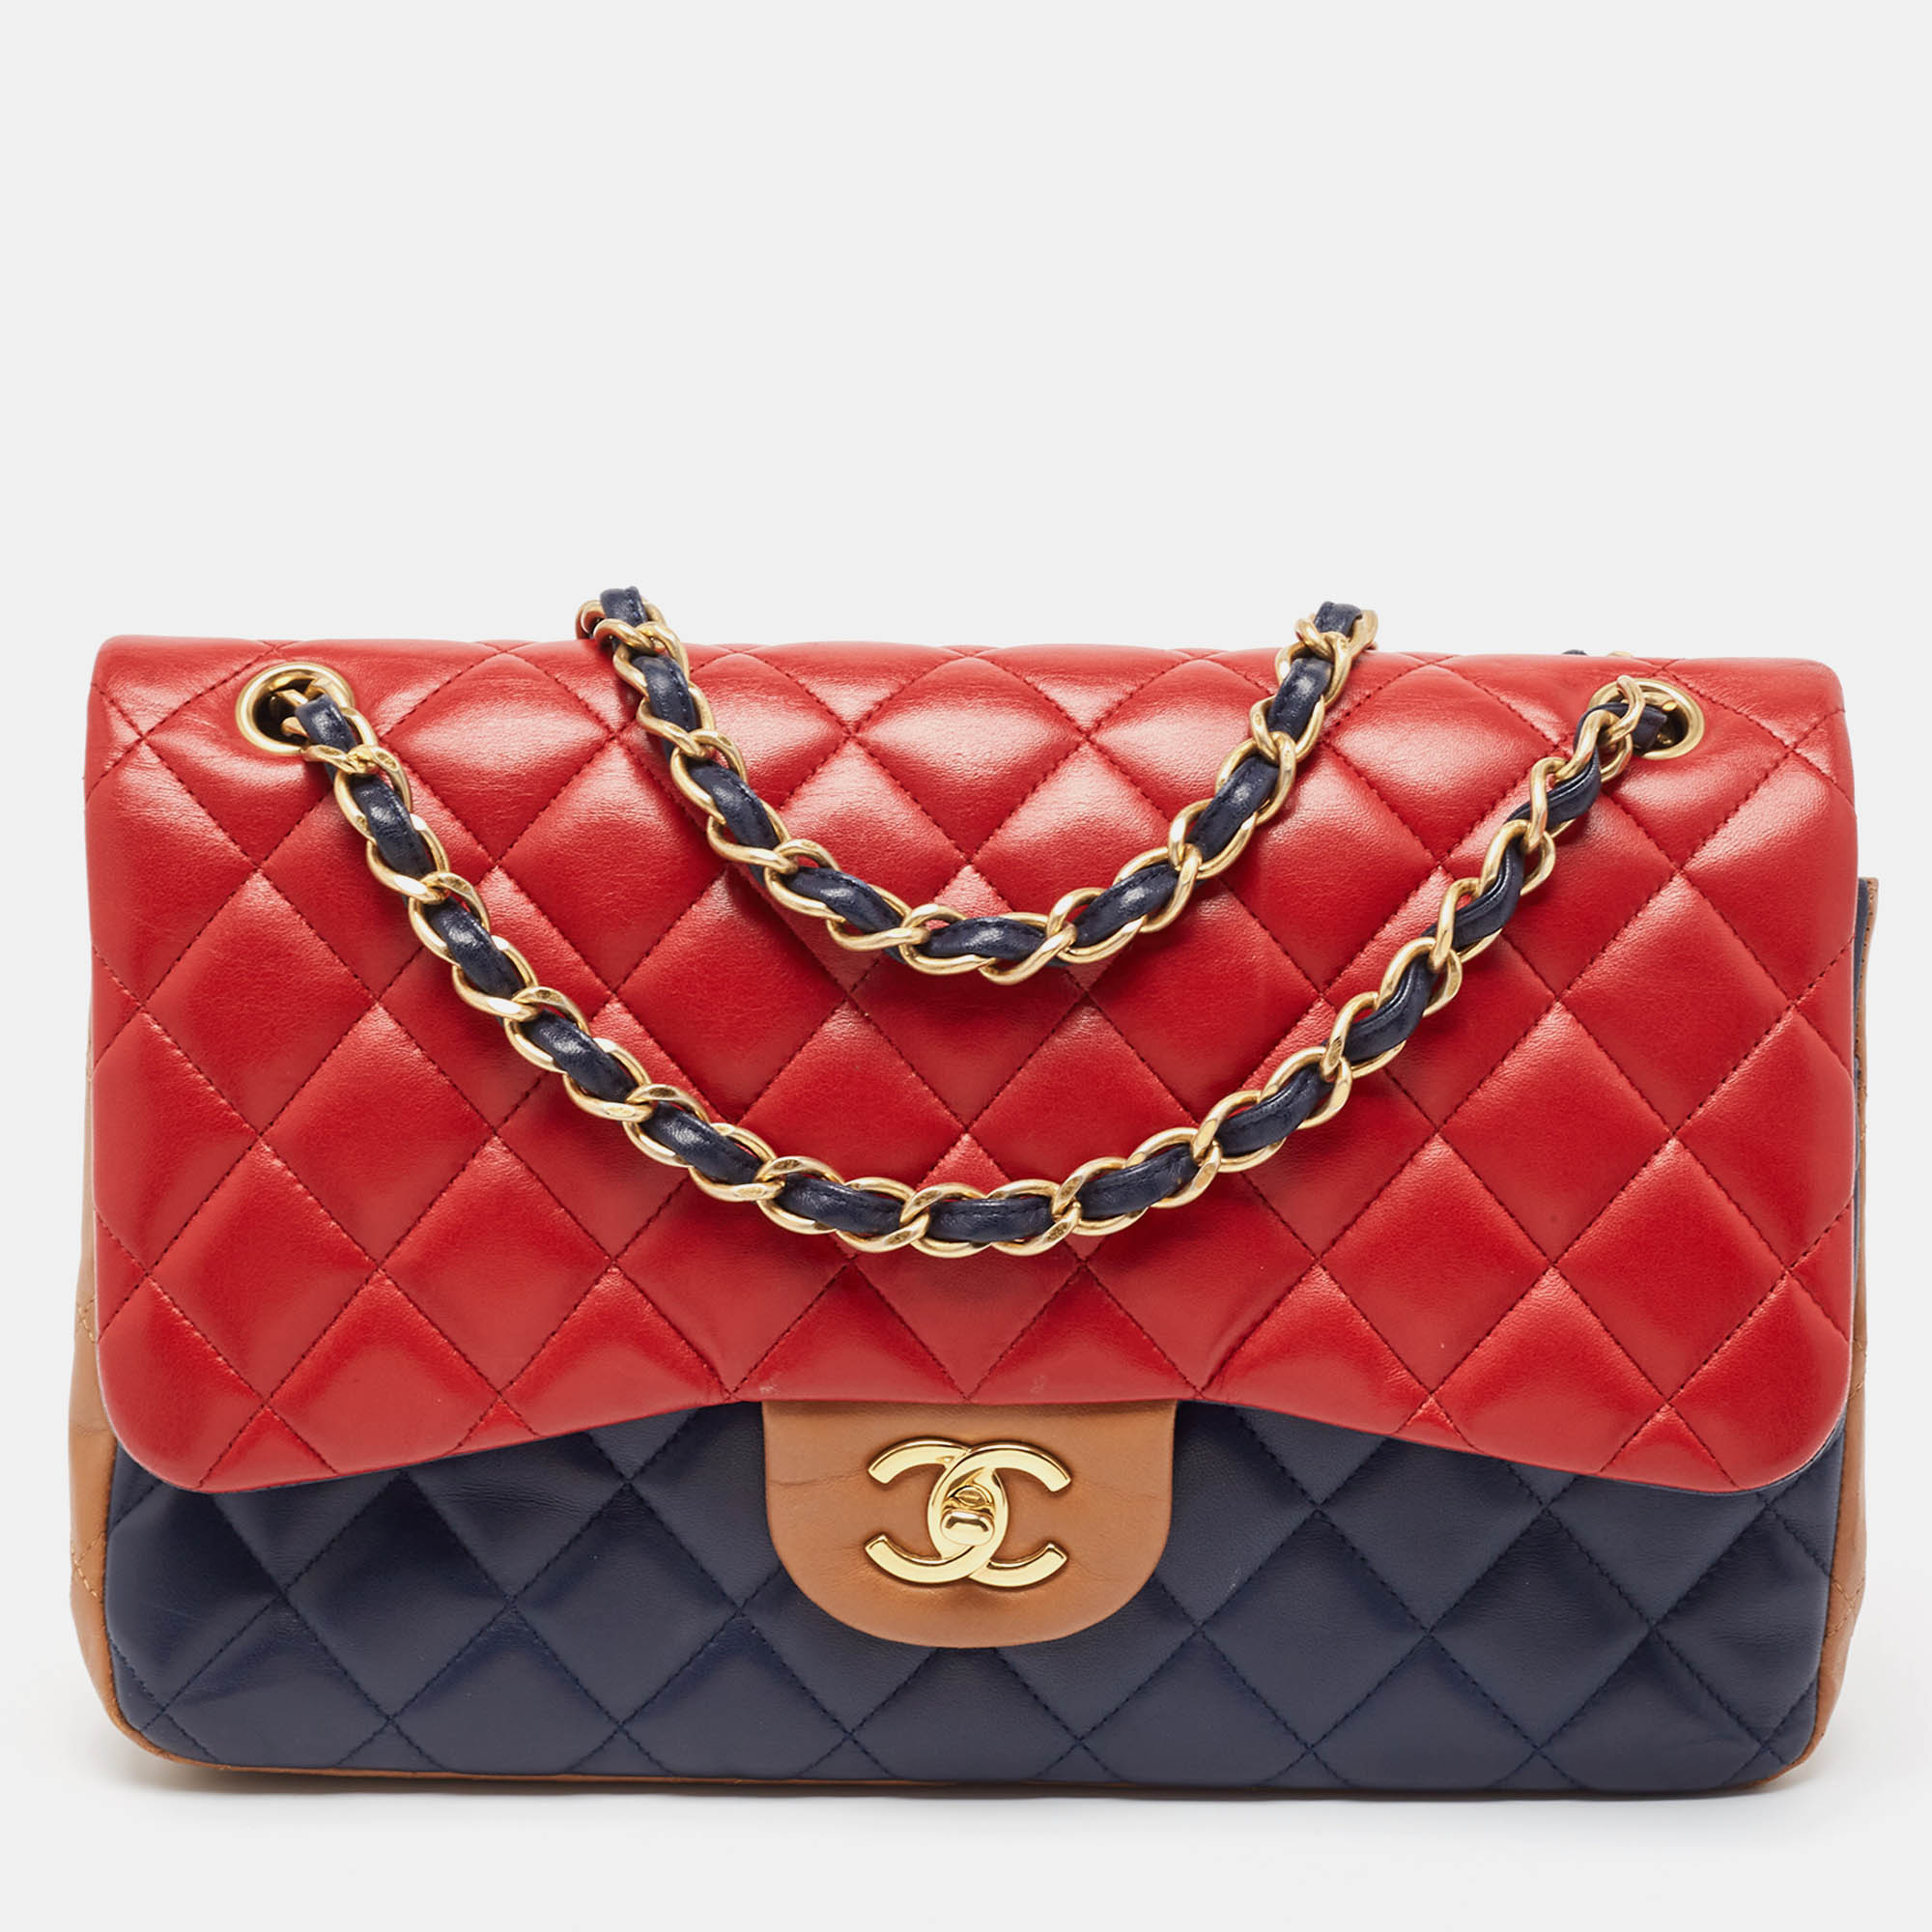 Chanel tricolor quilted lambskin leather jumbo classic double flap bag